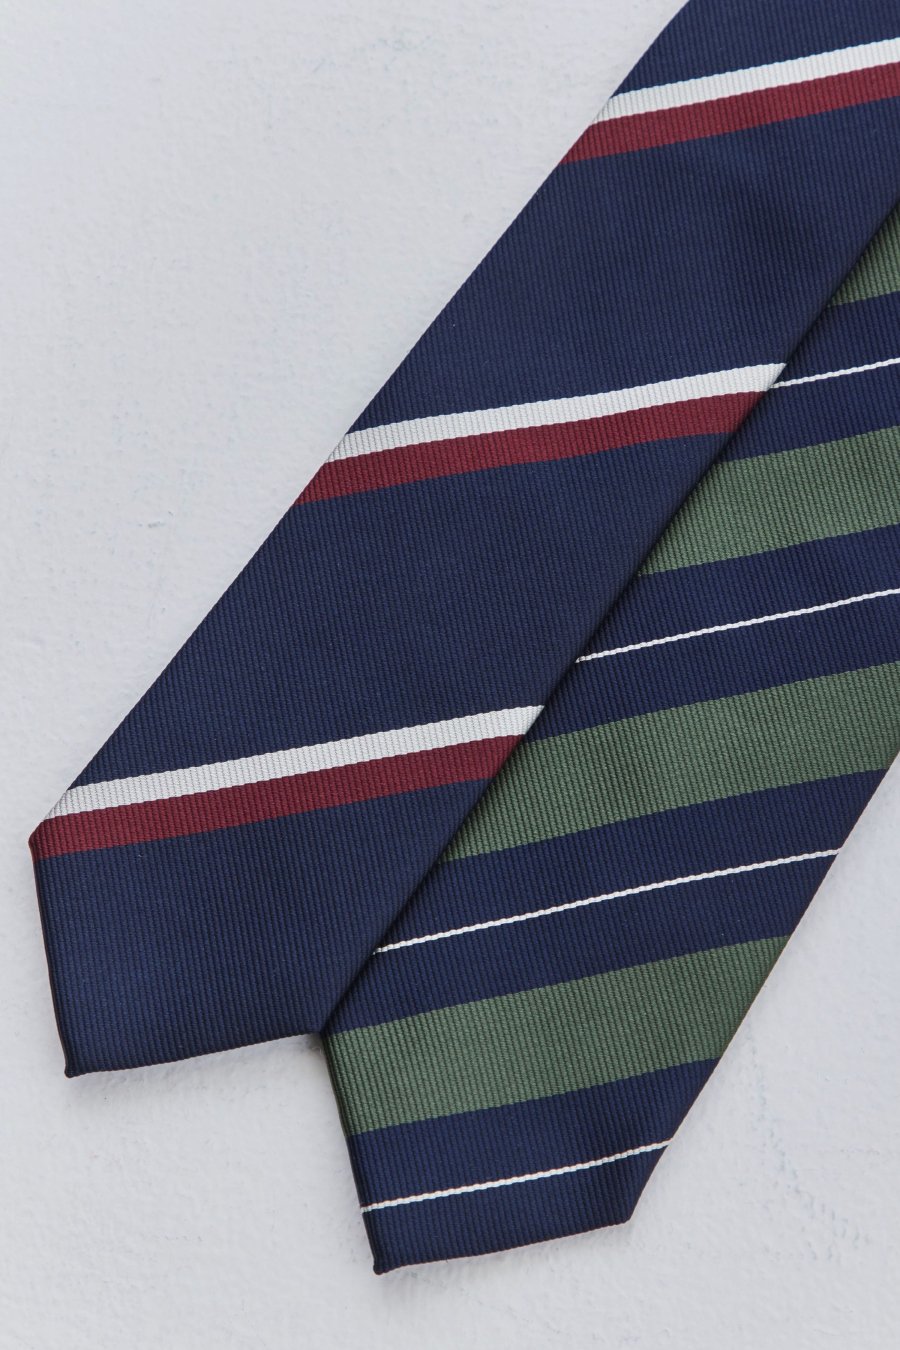 LITTLEBIG  22aw Regimental Tie（NAVY）<img class='new_mark_img2' src='https://img.shop-pro.jp/img/new/icons15.gif' style='border:none;display:inline;margin:0px;padding:0px;width:auto;' />